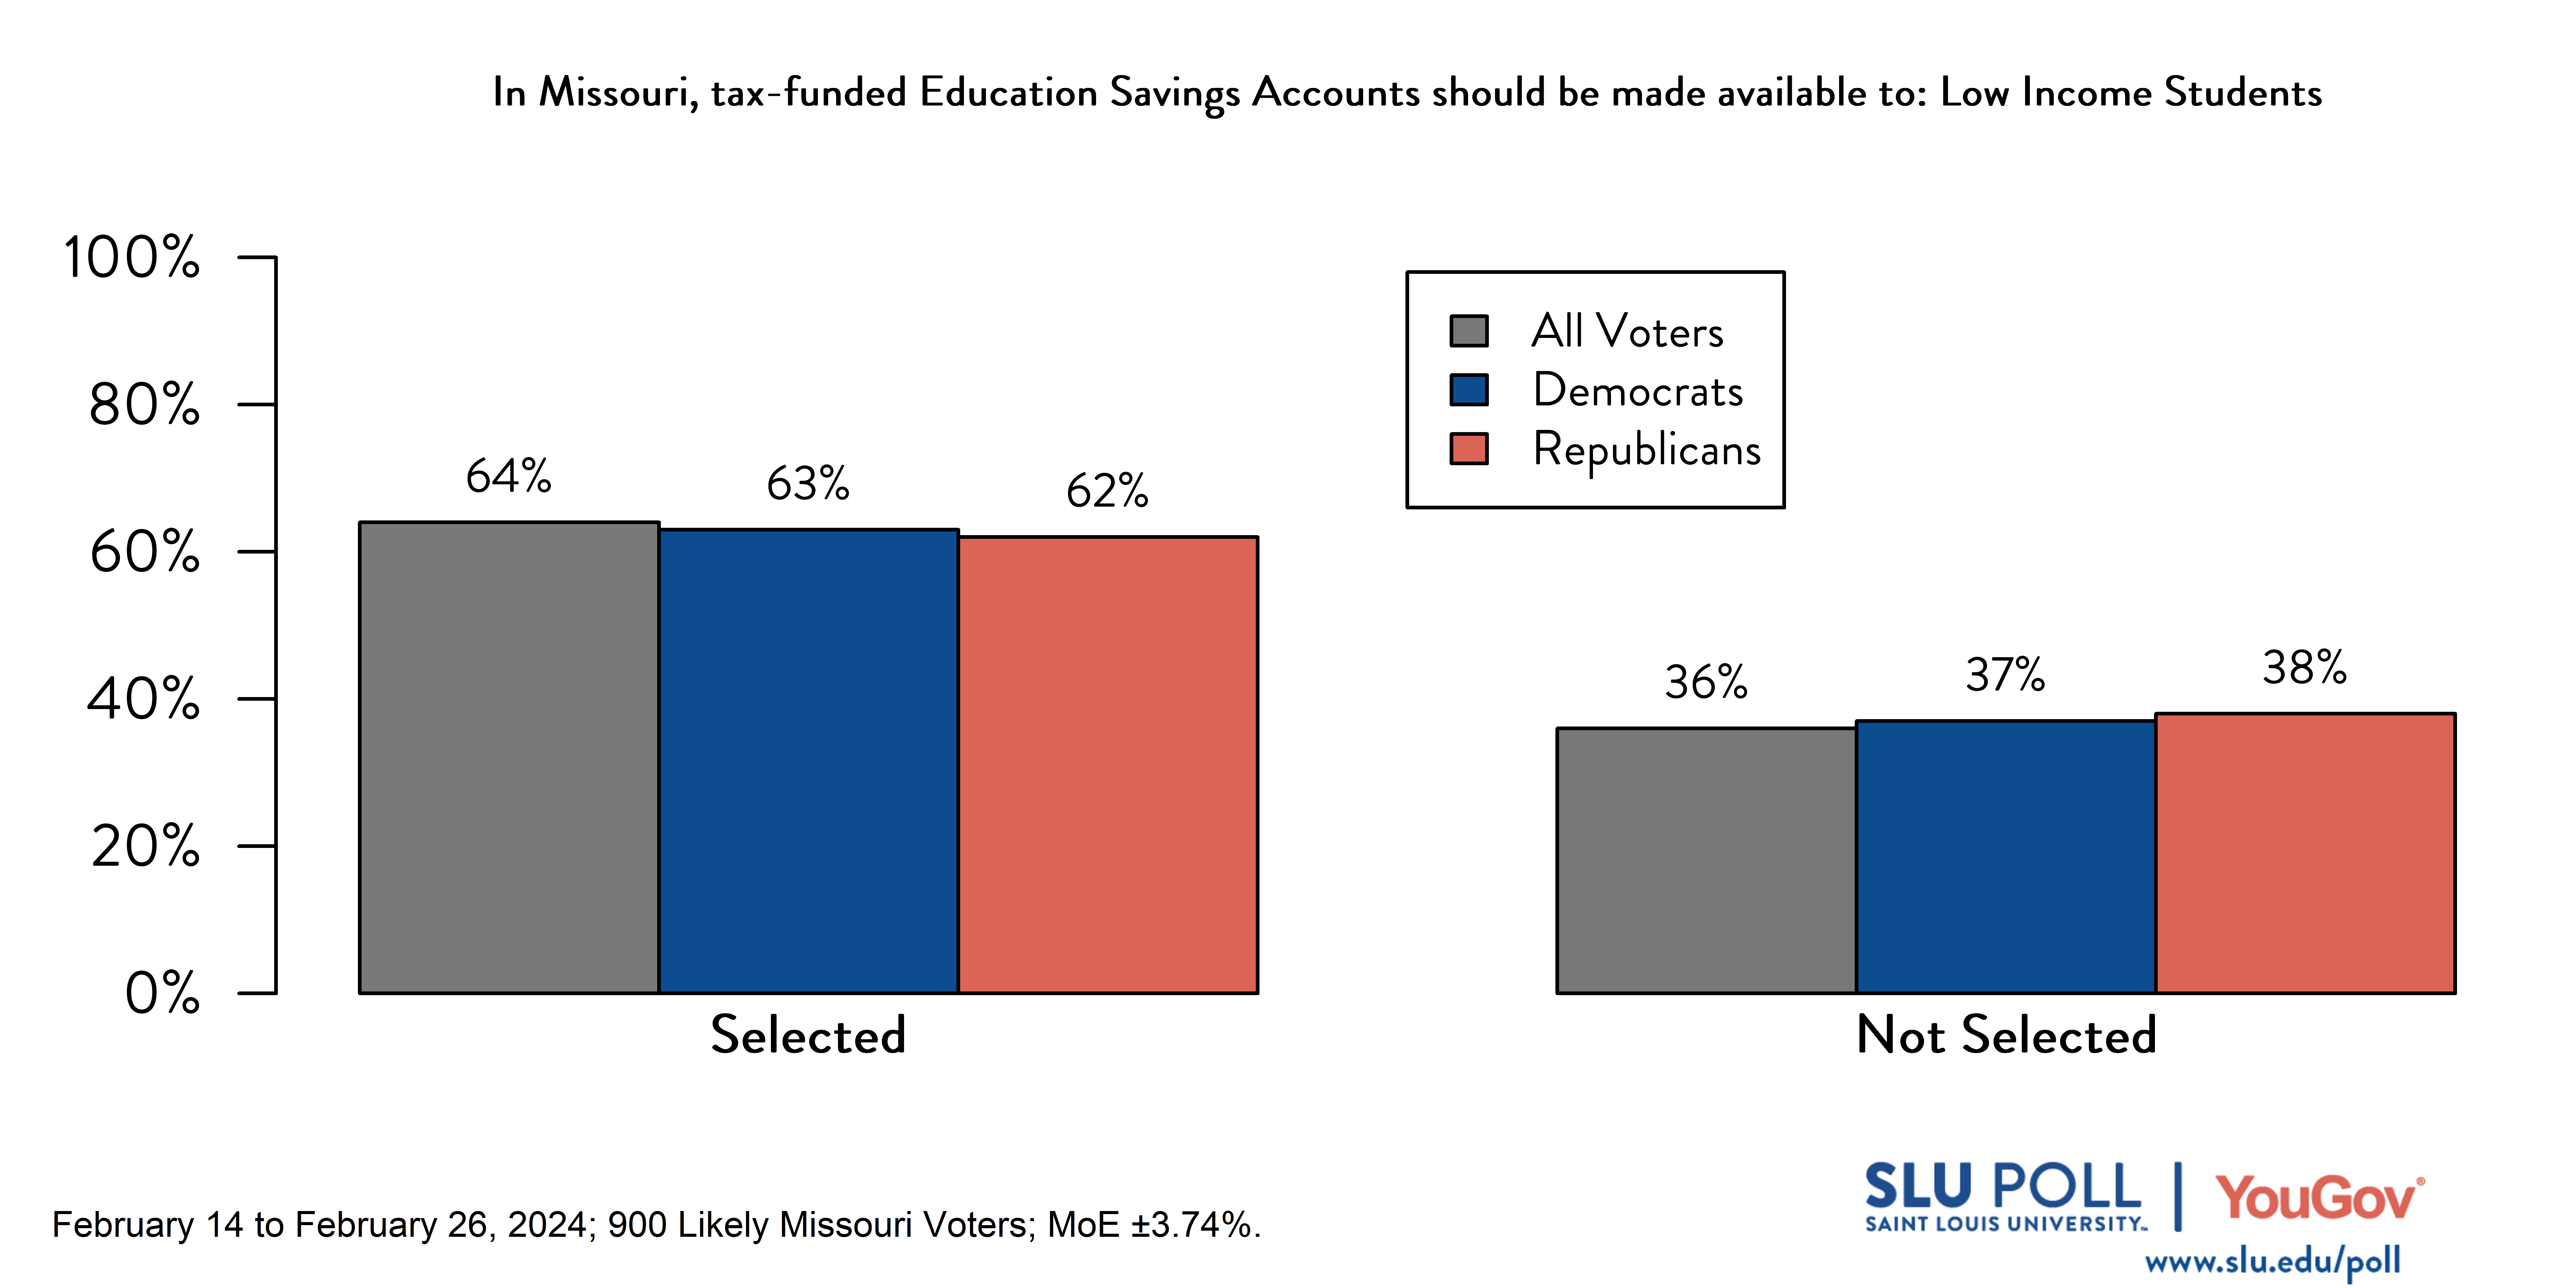 "Likely voters' responses to 'In Missouri, tax-funded Education Savings Accounts should be made available to: Students in households that earn up to $75,000 (250% of the federal poverty level)': 64% selected, and 36% not selected. Democratic voters' responses: ' 63% selected, and 37% not selected. Republican voters' responses:  62% selected, and 38% not selected."